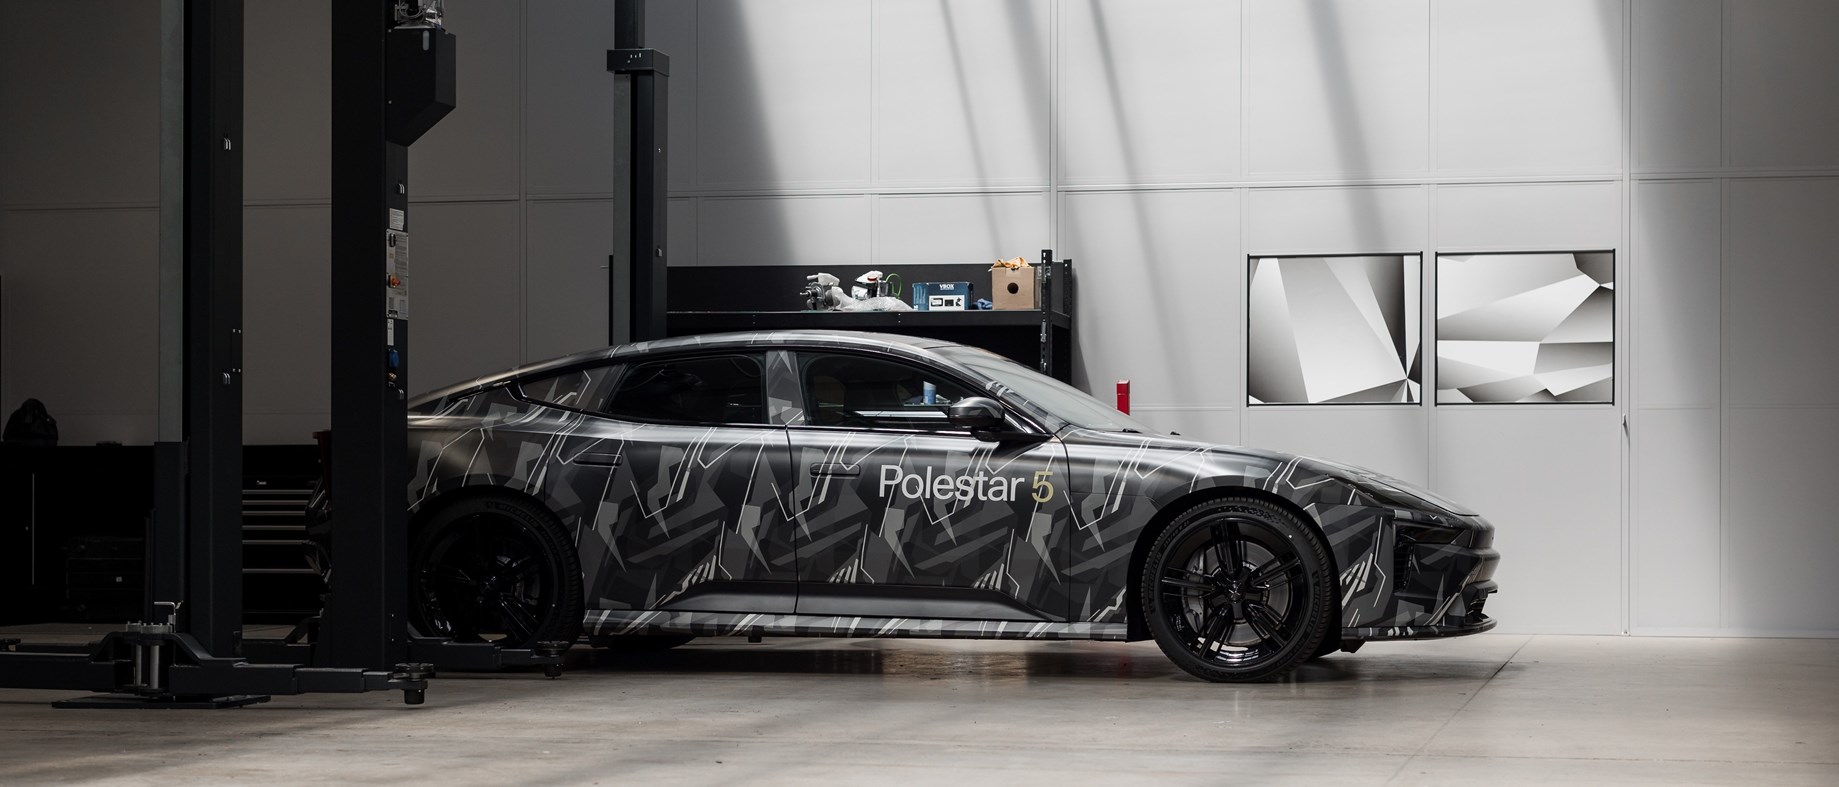 Polestar 5 will receive a StoreDot battery - 5 minutes of charging for 160 km